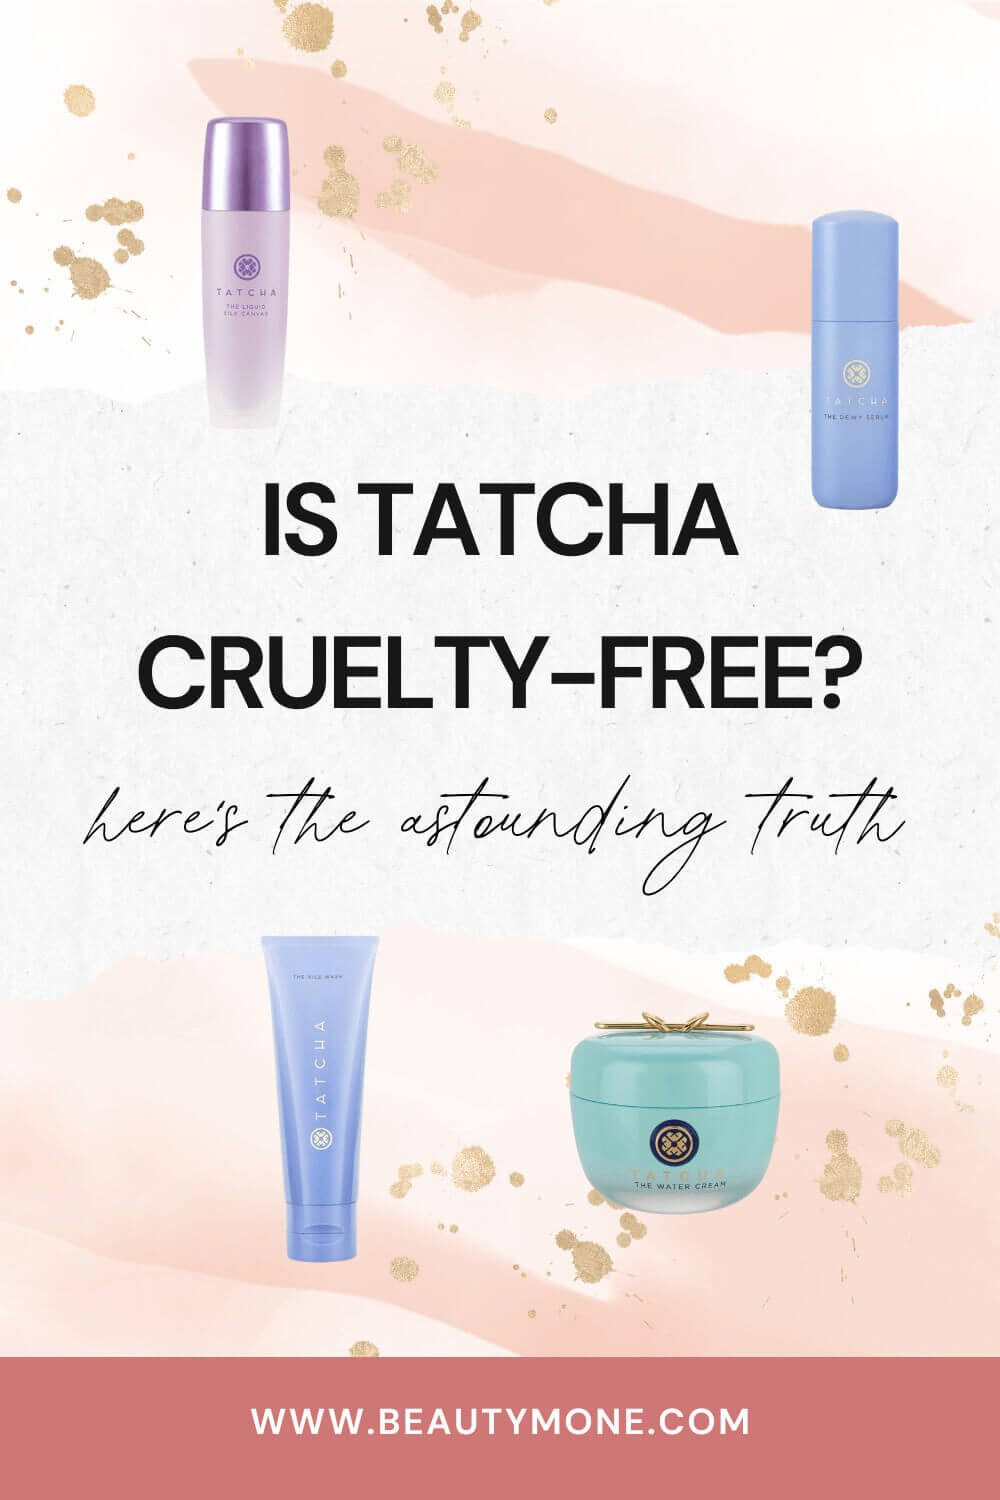 Is Tatcha Cruelty-Free? Here's The Astounding Truth